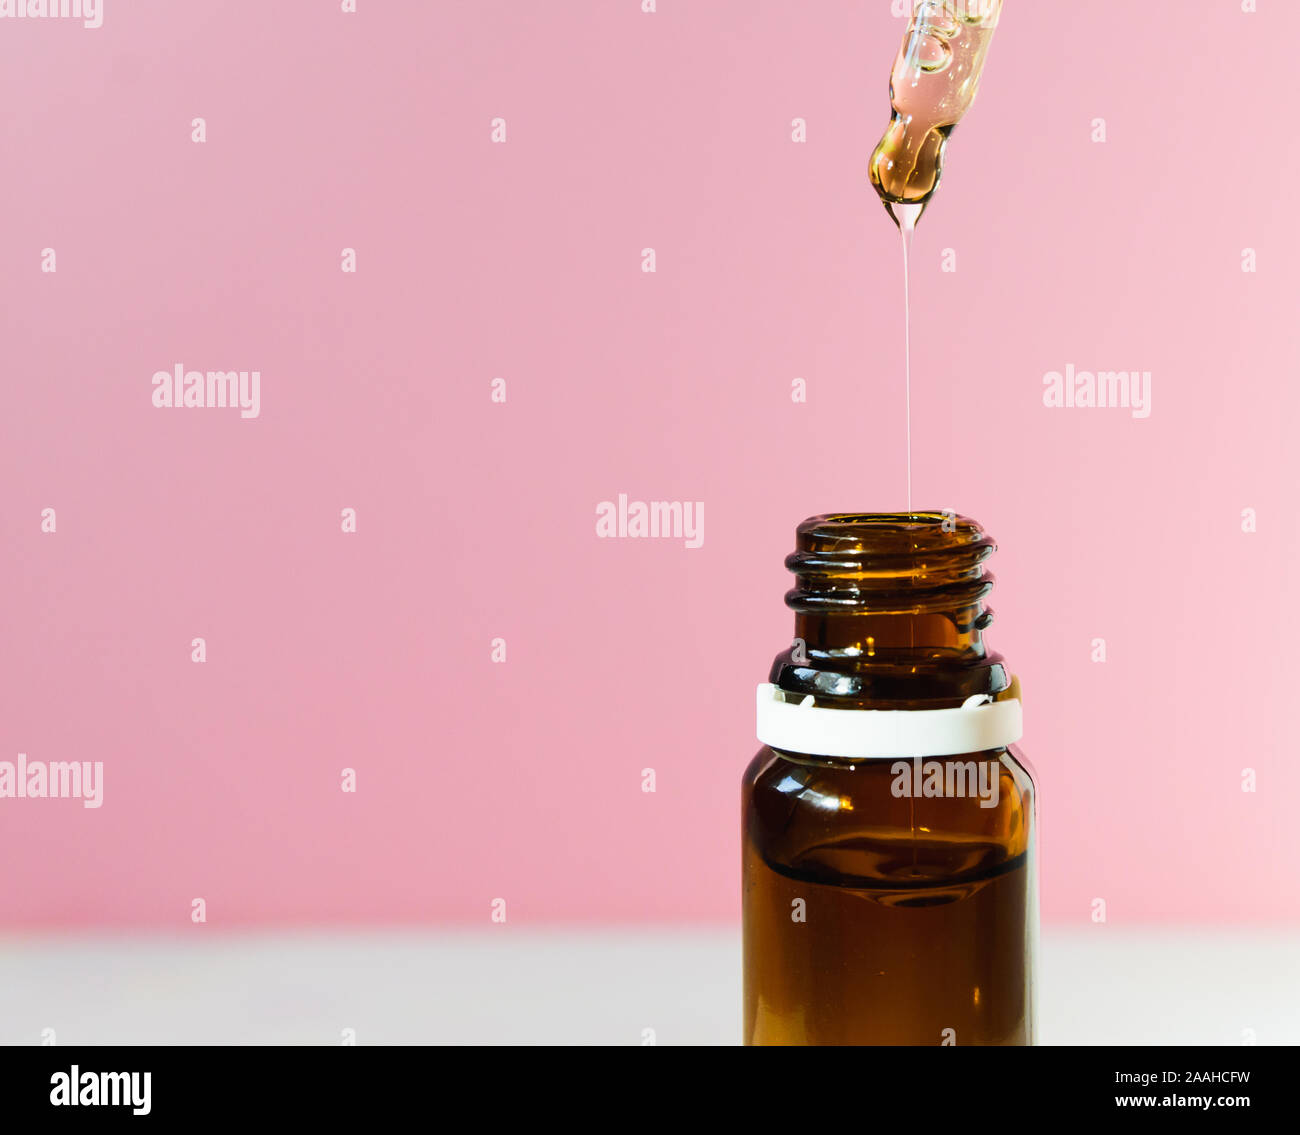 cosmetic product, bottle with hyaluronic acid on a pink background, close-up. Copy space. Stock Photo